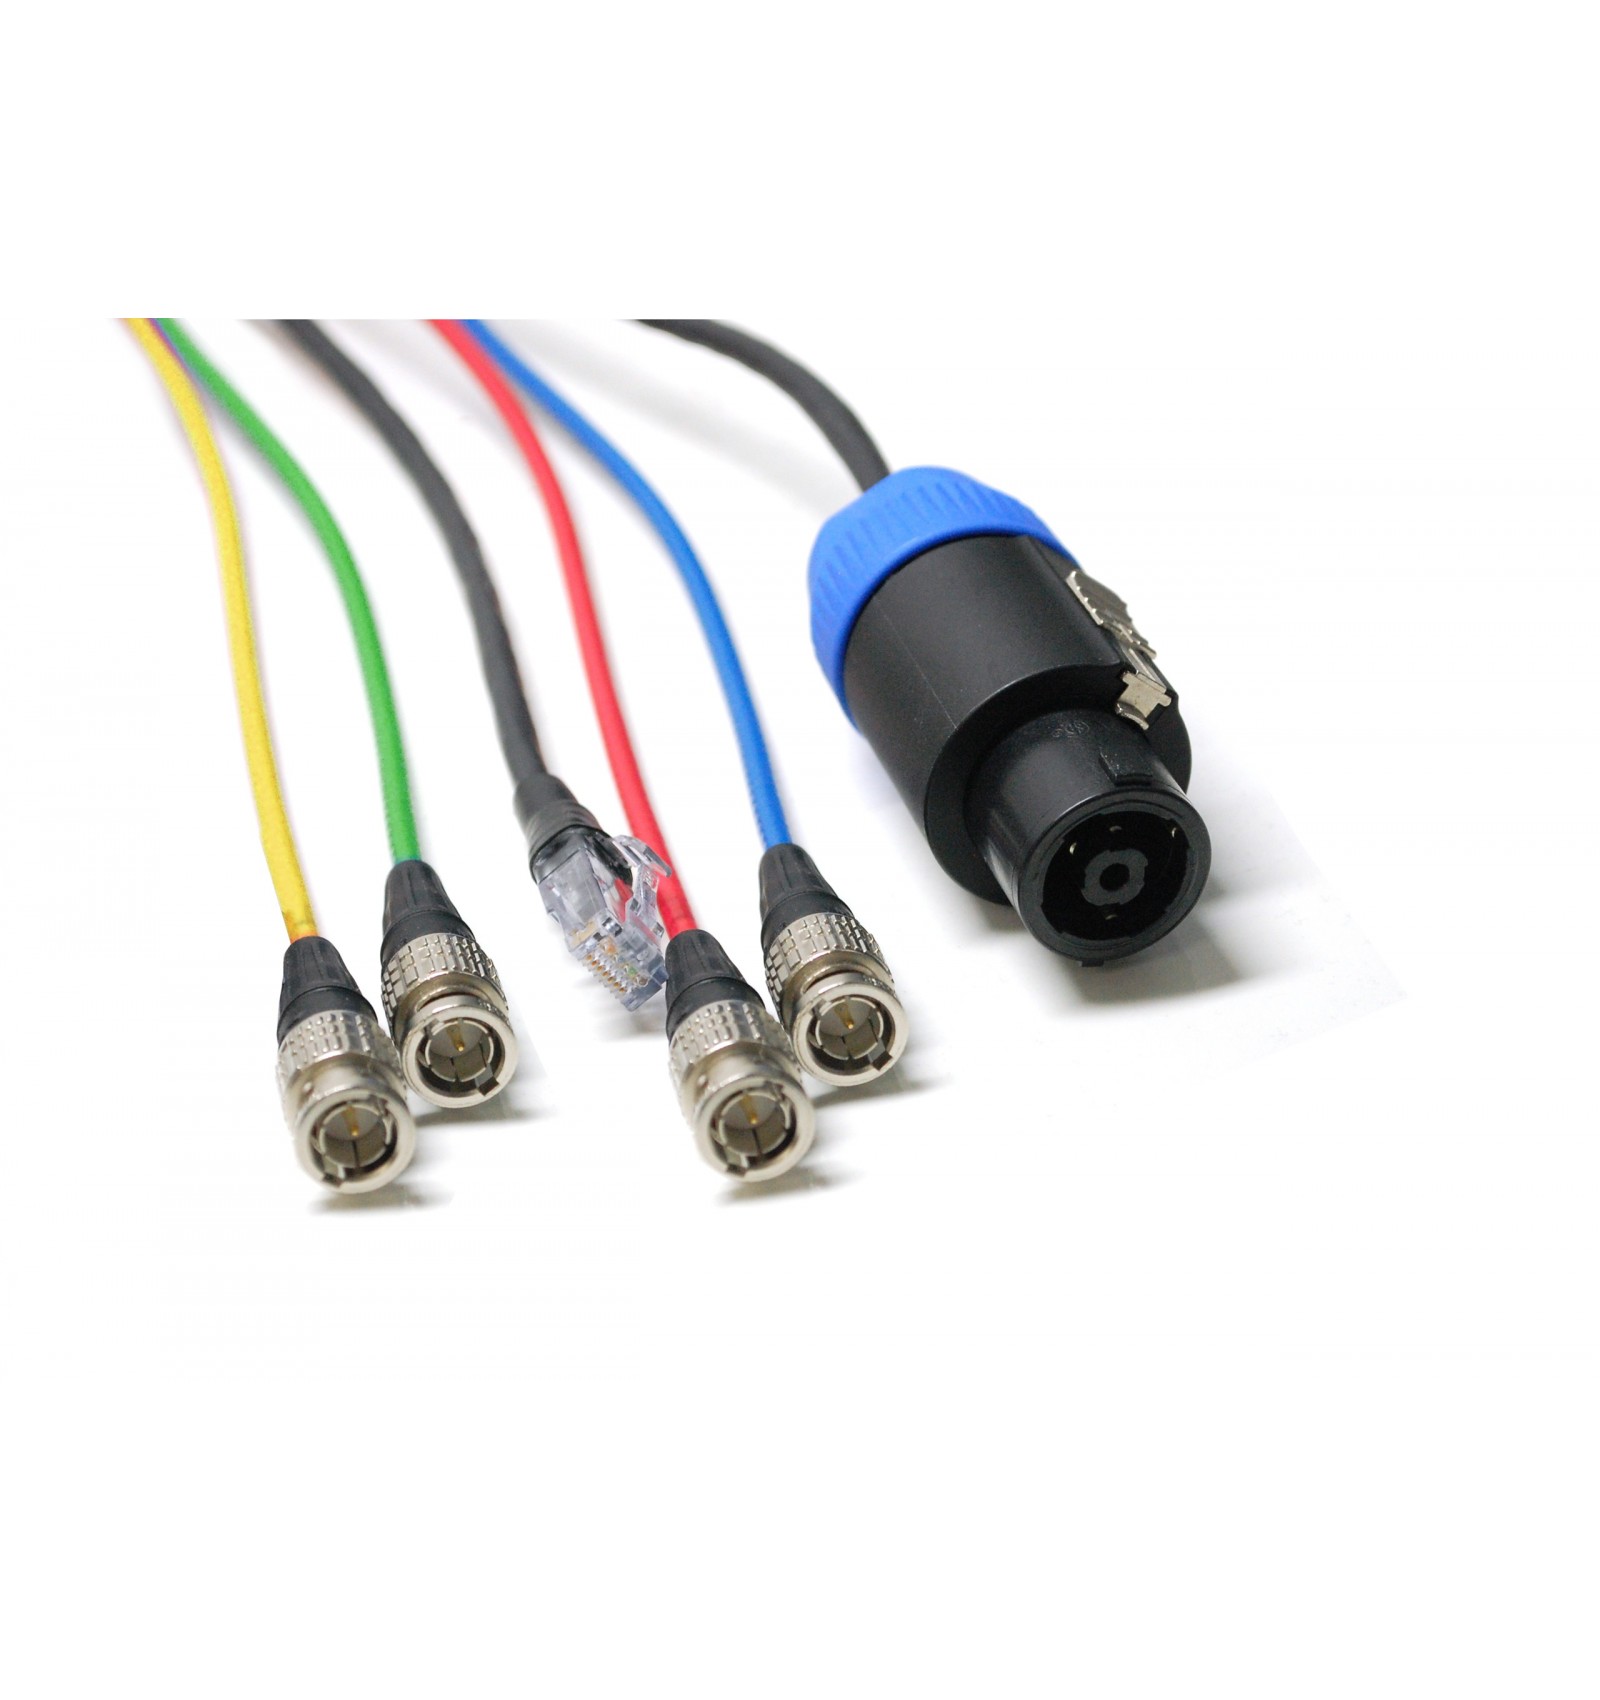 https://store.nebtek.com/3199-thickbox_default/village-runner-cable-with-4-sdi-lines-2-audio-pairs-1-ethernet-and-speakon.jpg